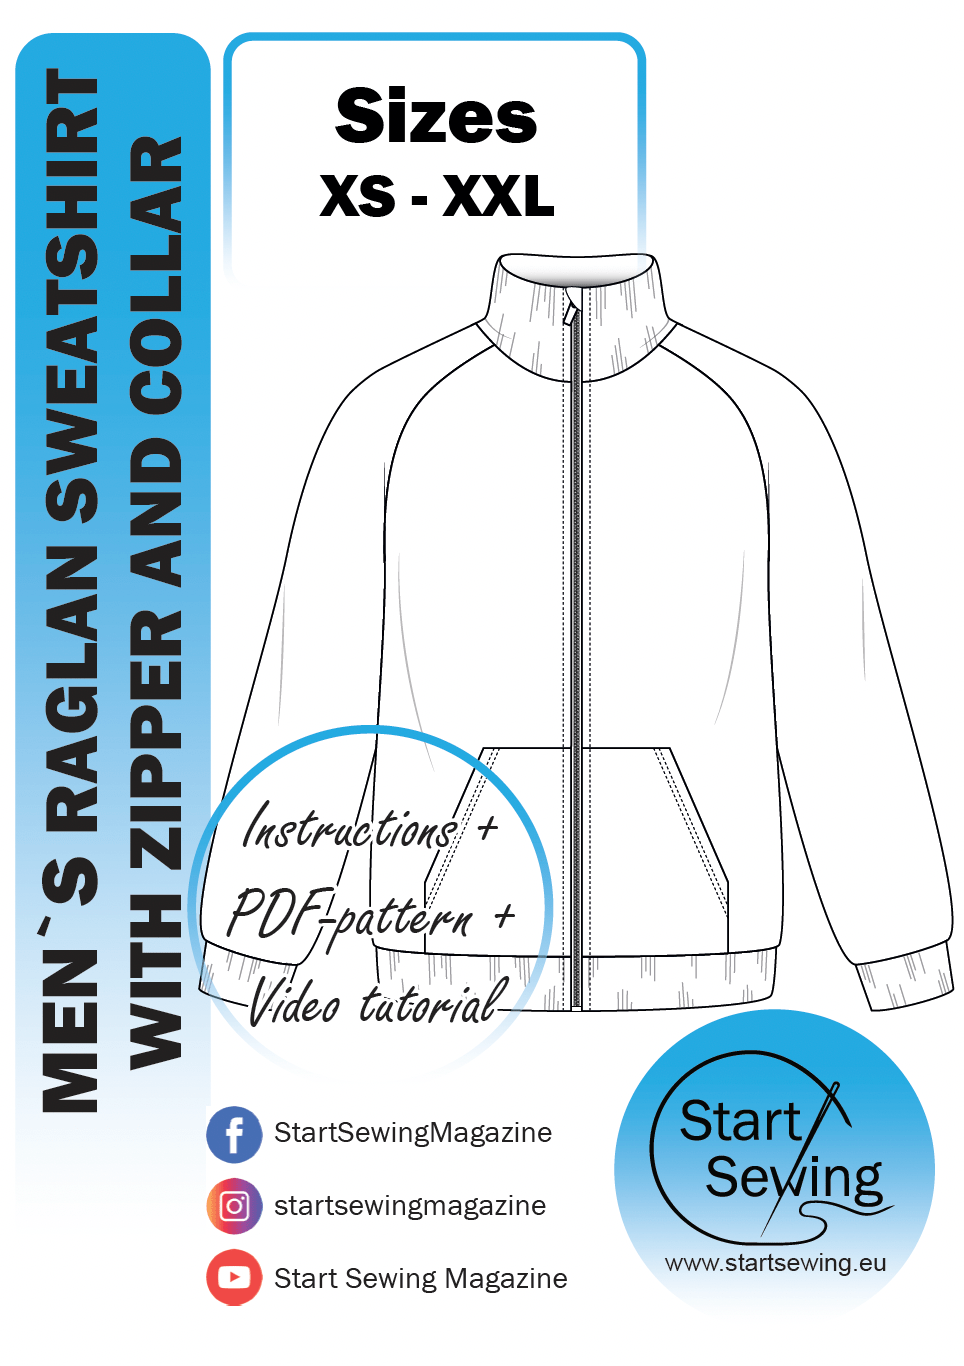 Men's sweatshirt with a collar and zipper PDF sewing pattern. This pattern includes sizes XS-XXL.